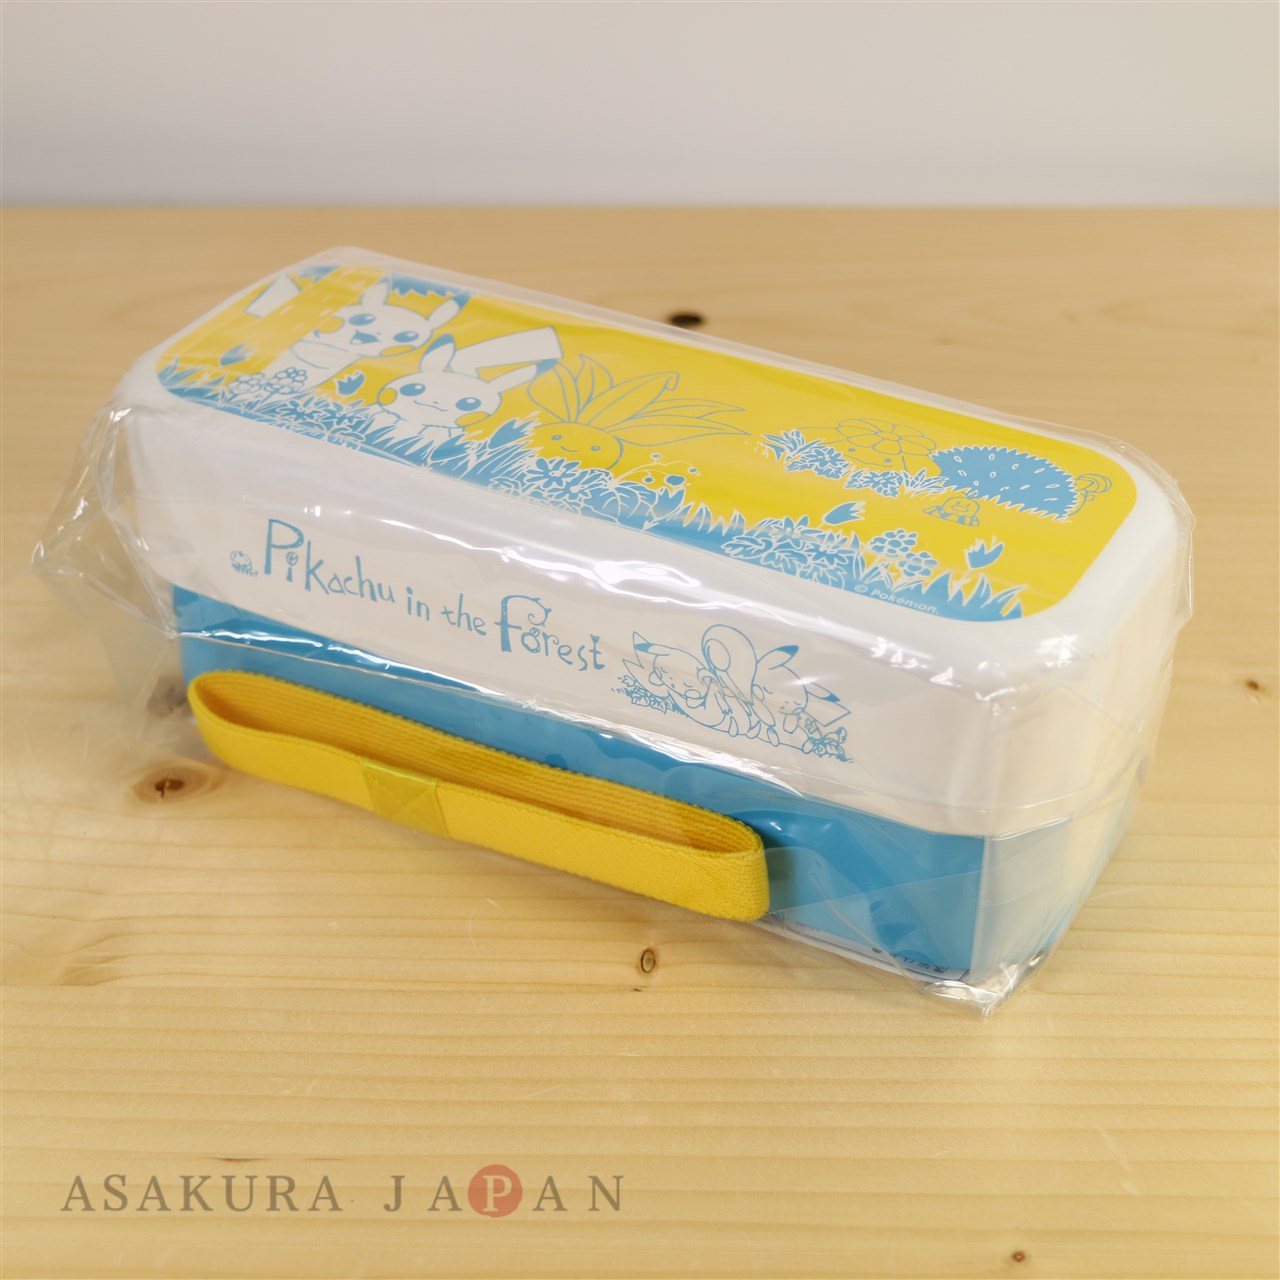 Pokemon Center 2017 Pikachu in the forest Two-stage Lunch Box